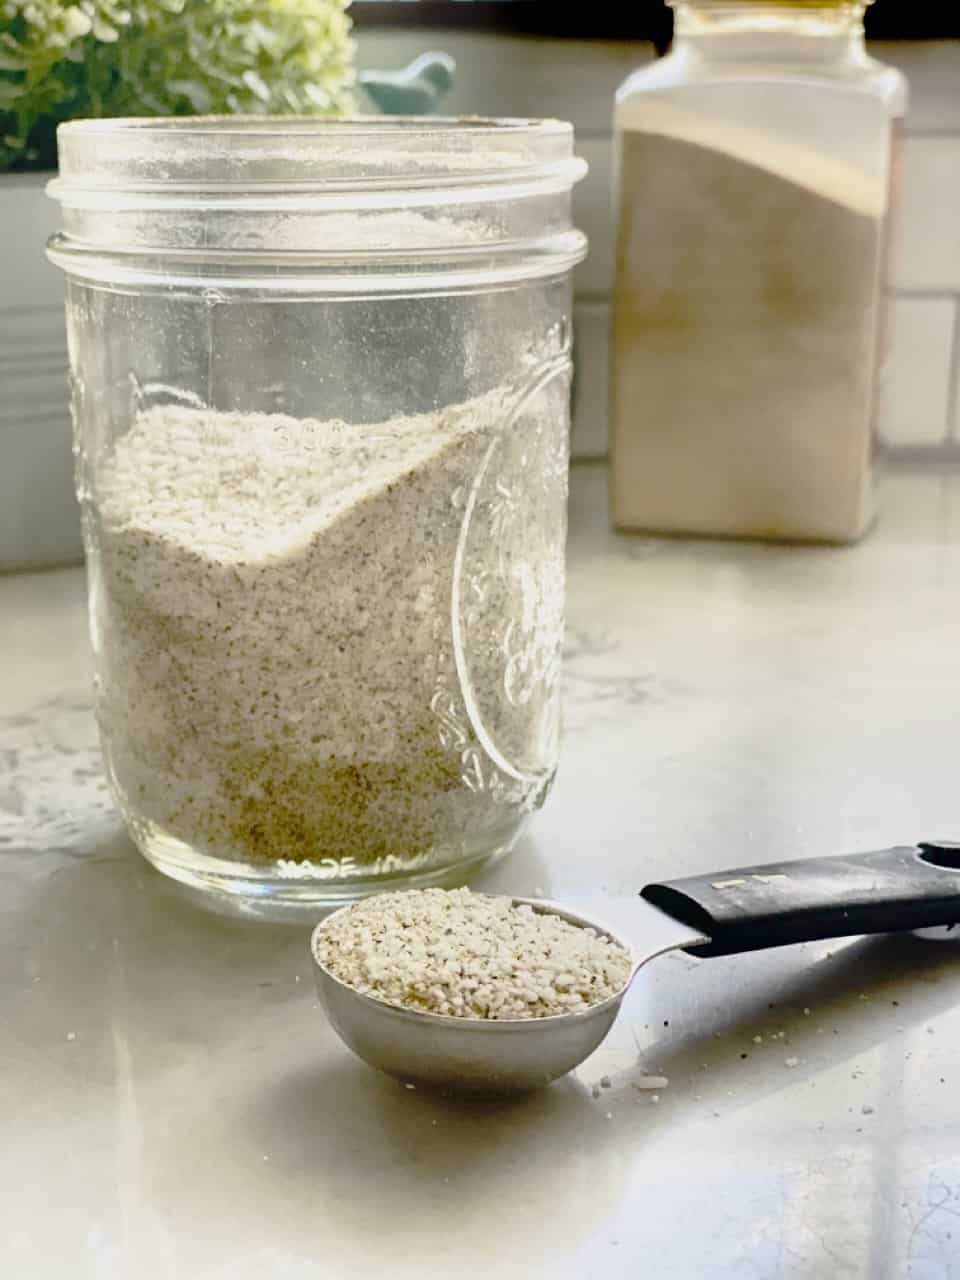 House seasoning in glass jar and in 1 tablespoon